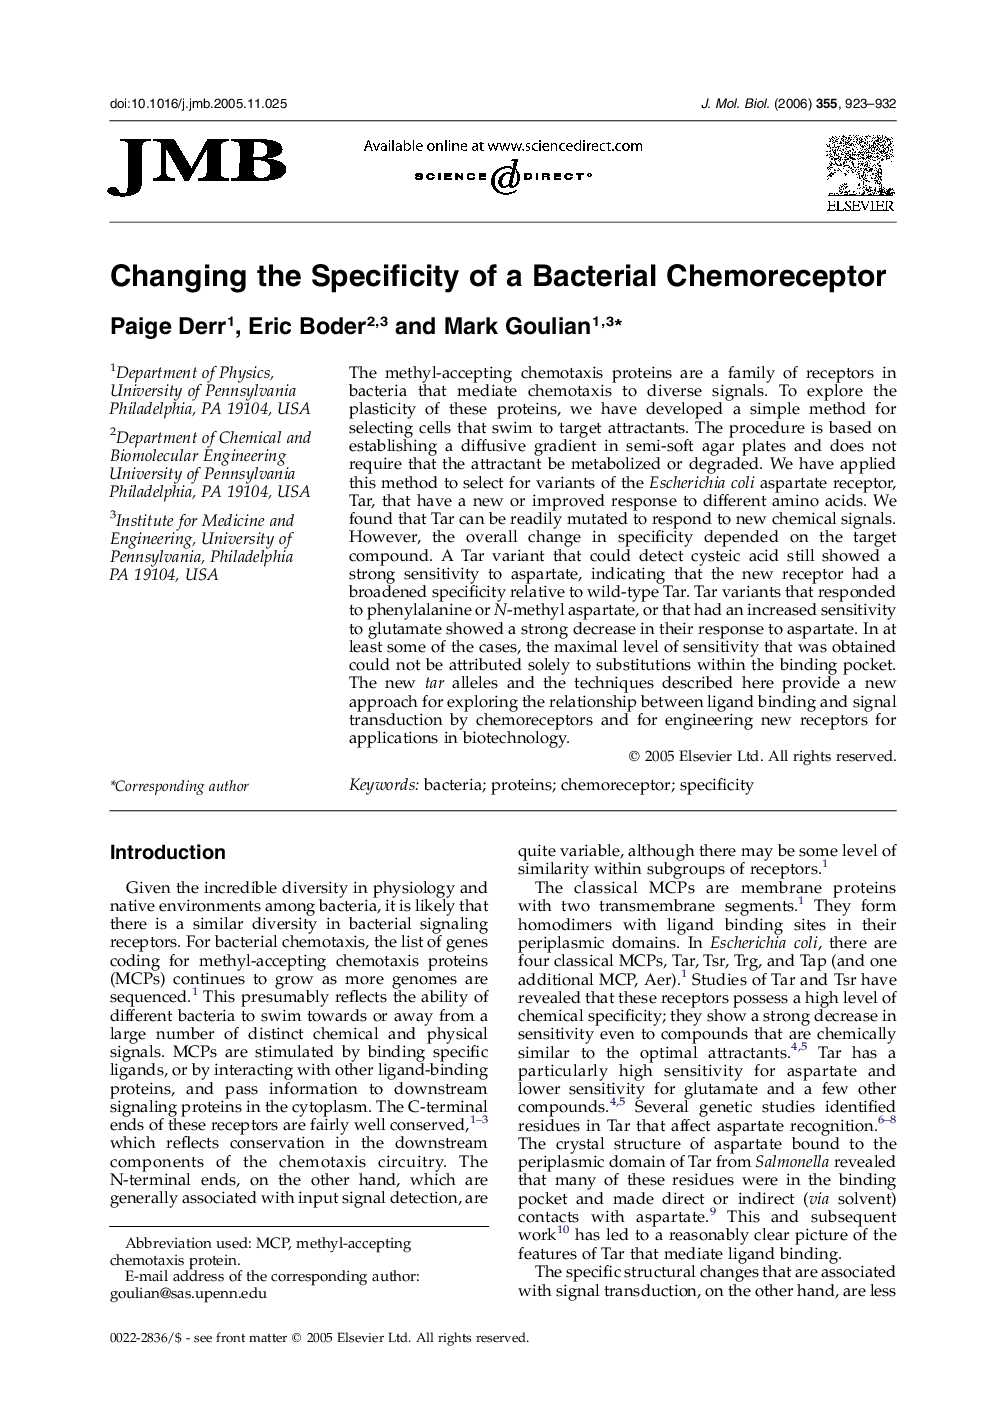 Changing the Specificity of a Bacterial Chemoreceptor